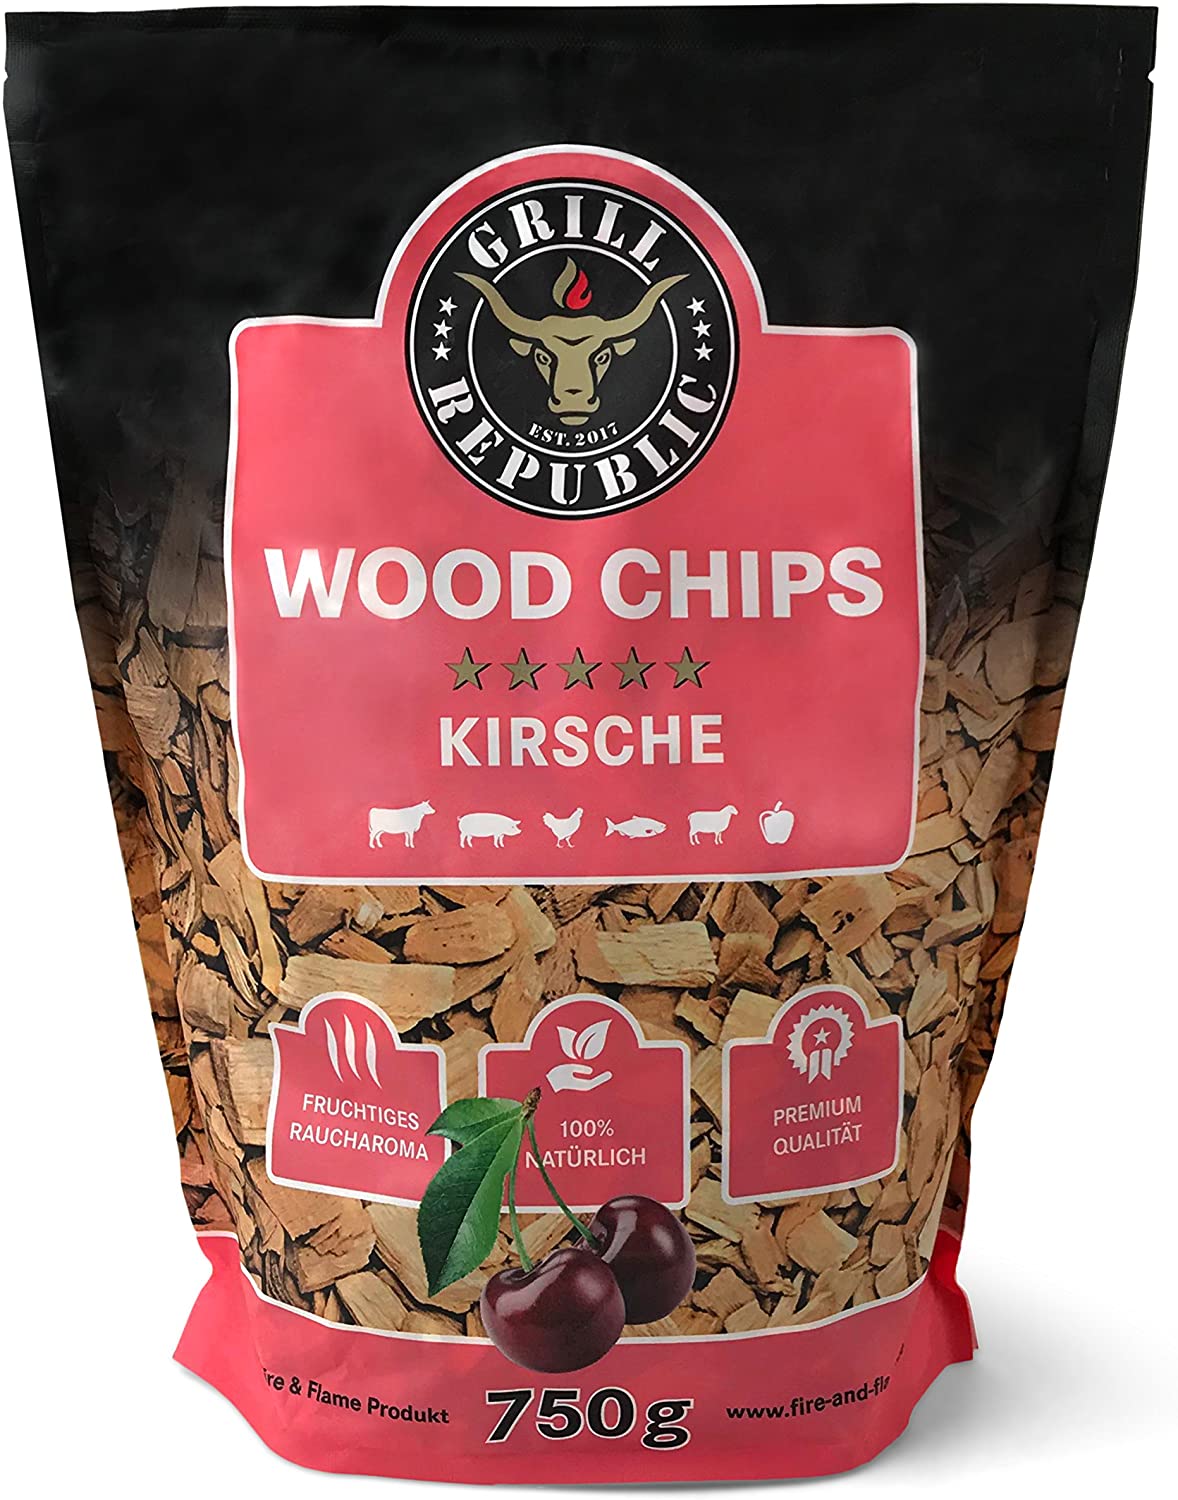 Grill Republic Woodchips